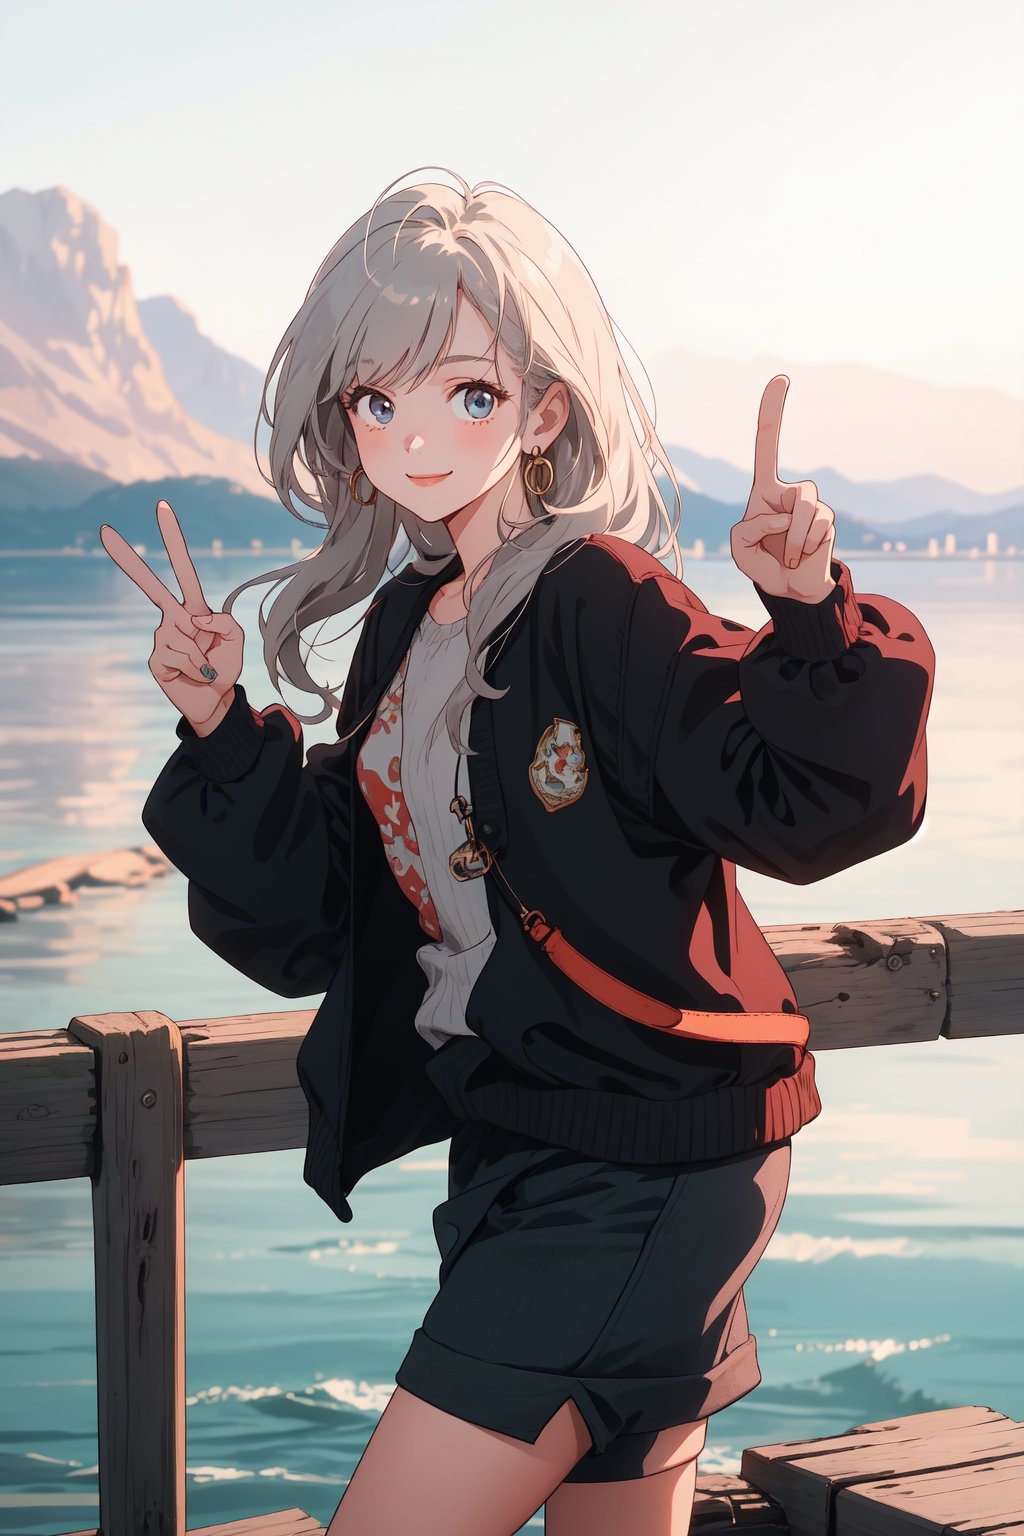 A young girl holding up her mobile phone and taking a selfie. She is smiling brightly and making a peace sign. She is wearing a cute outfit and her hair is styled in a trendy way. The background is a beautiful landscape, such as a beach, a park, or a city skyline.